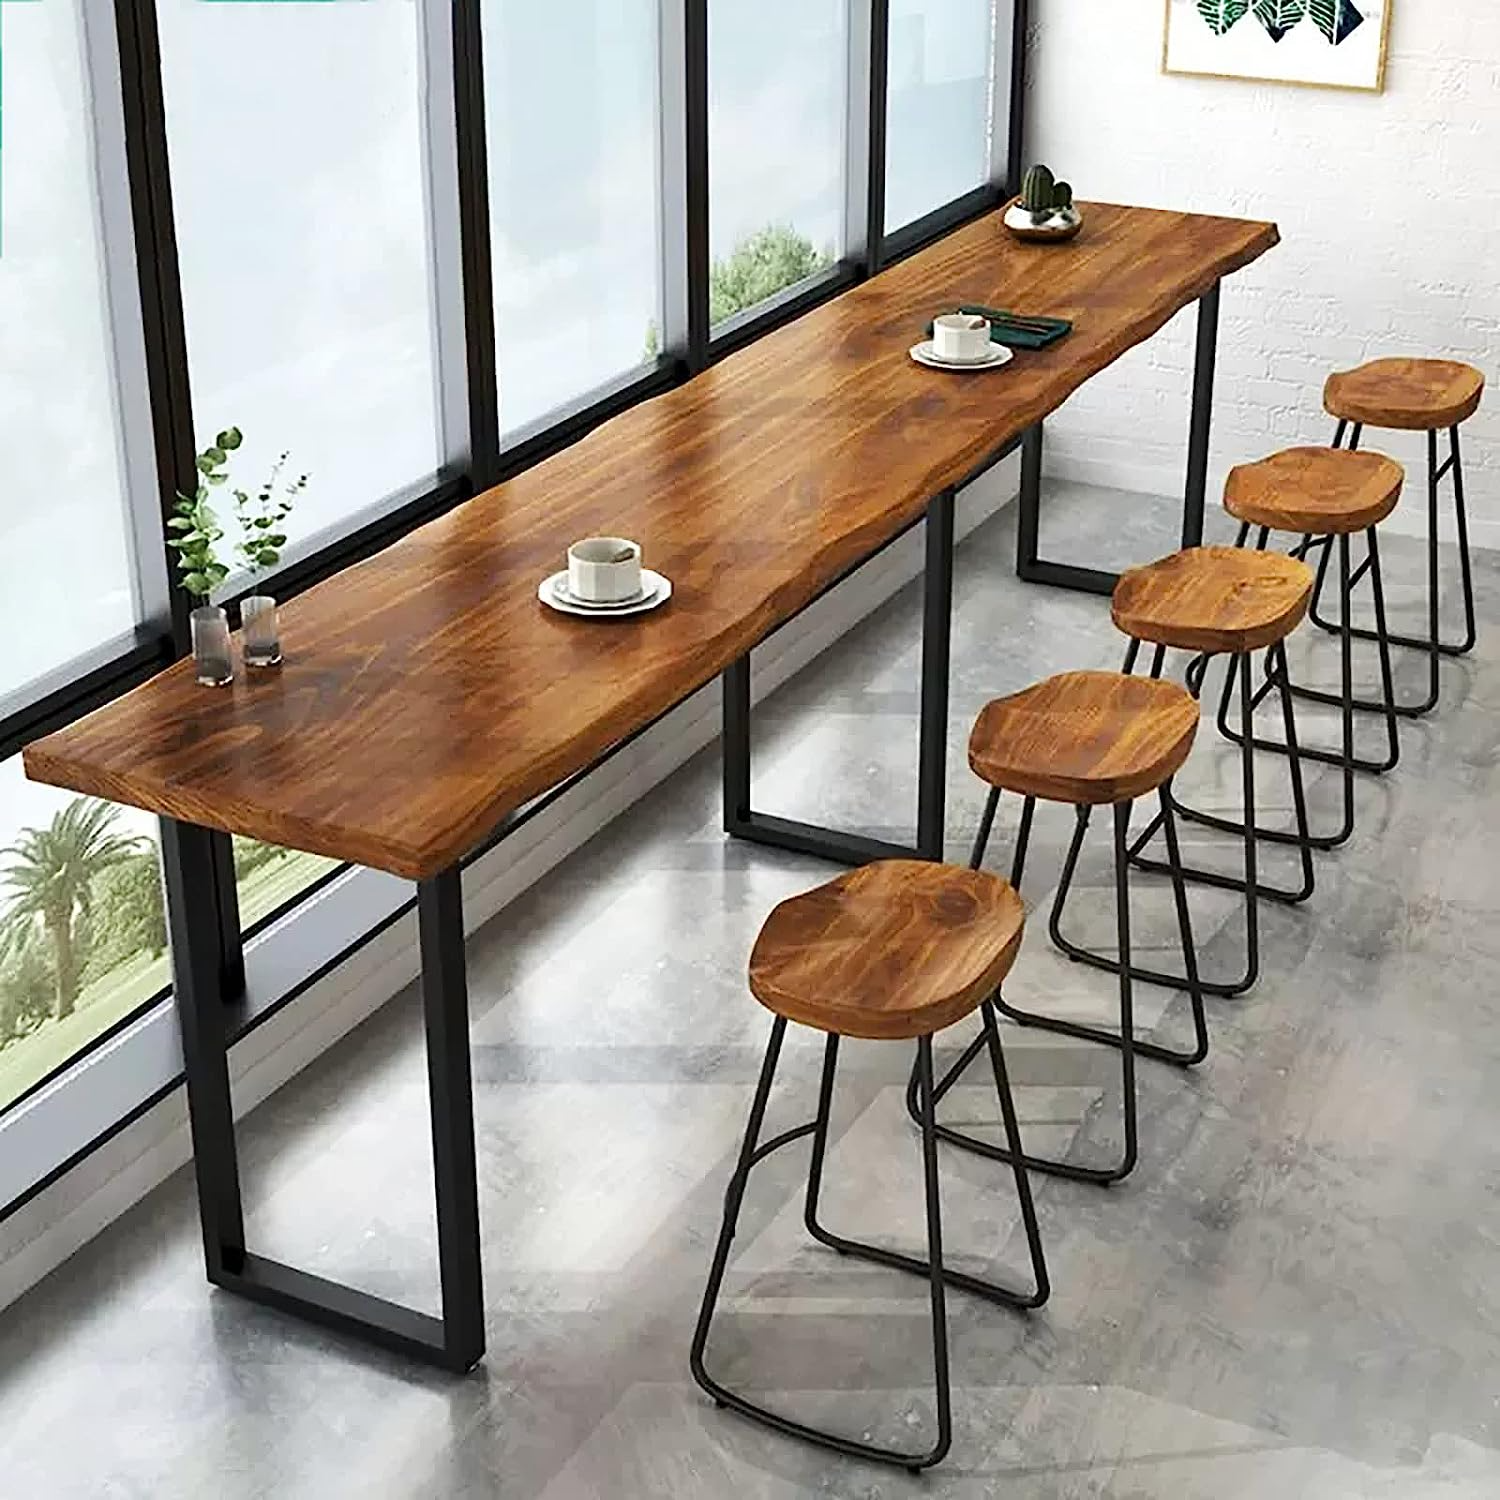 Counter height dining table – yes or no?